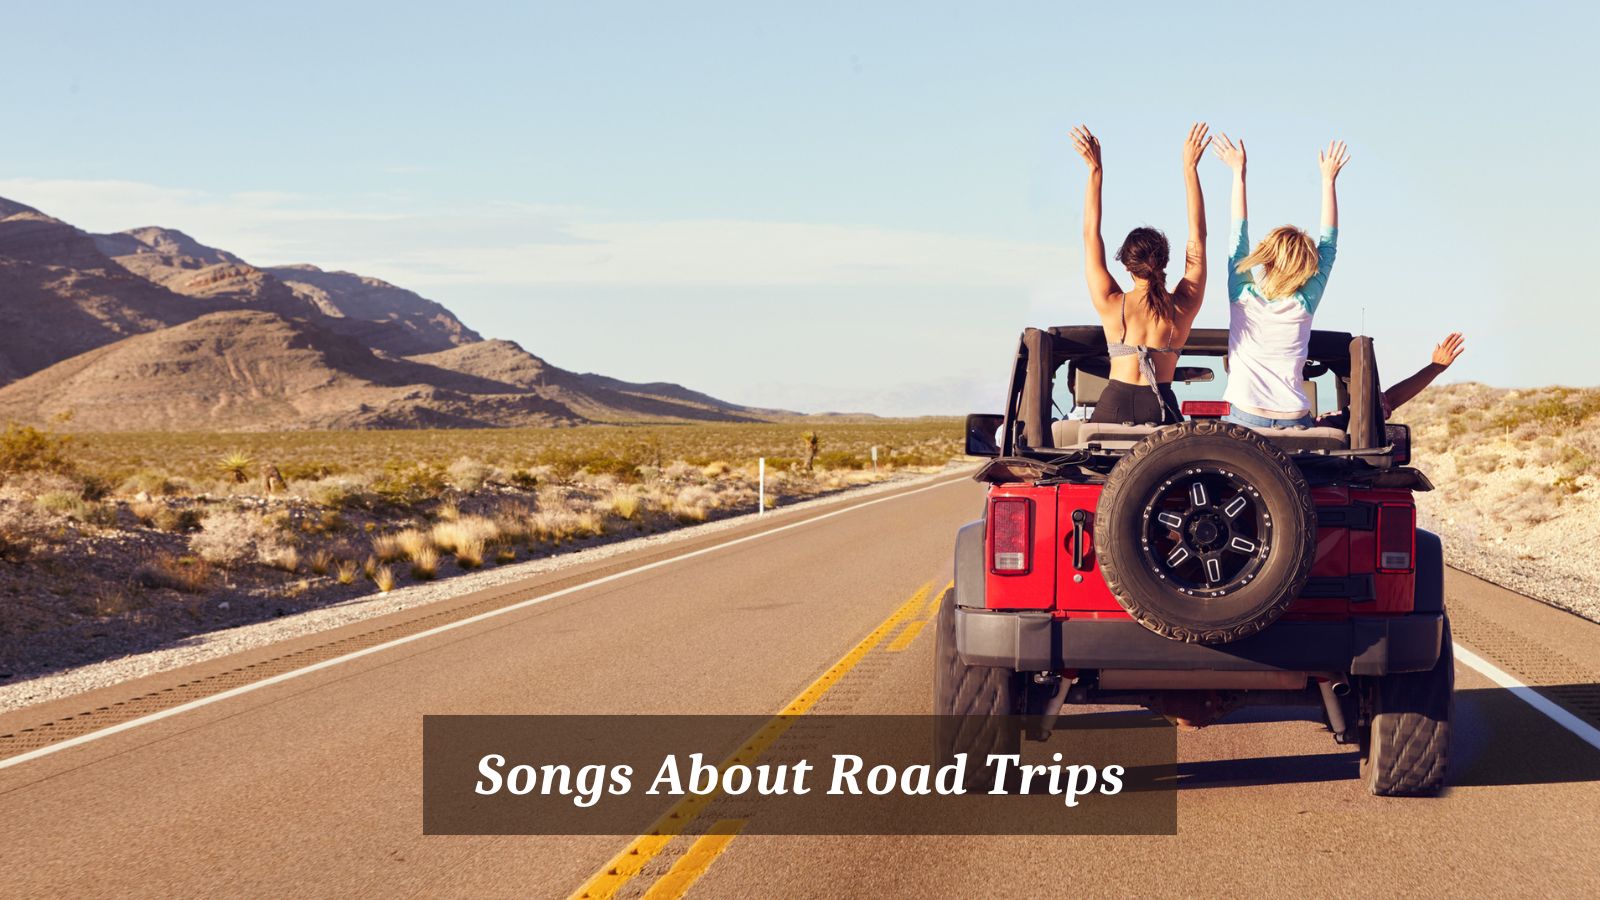 Songs About Road Trips